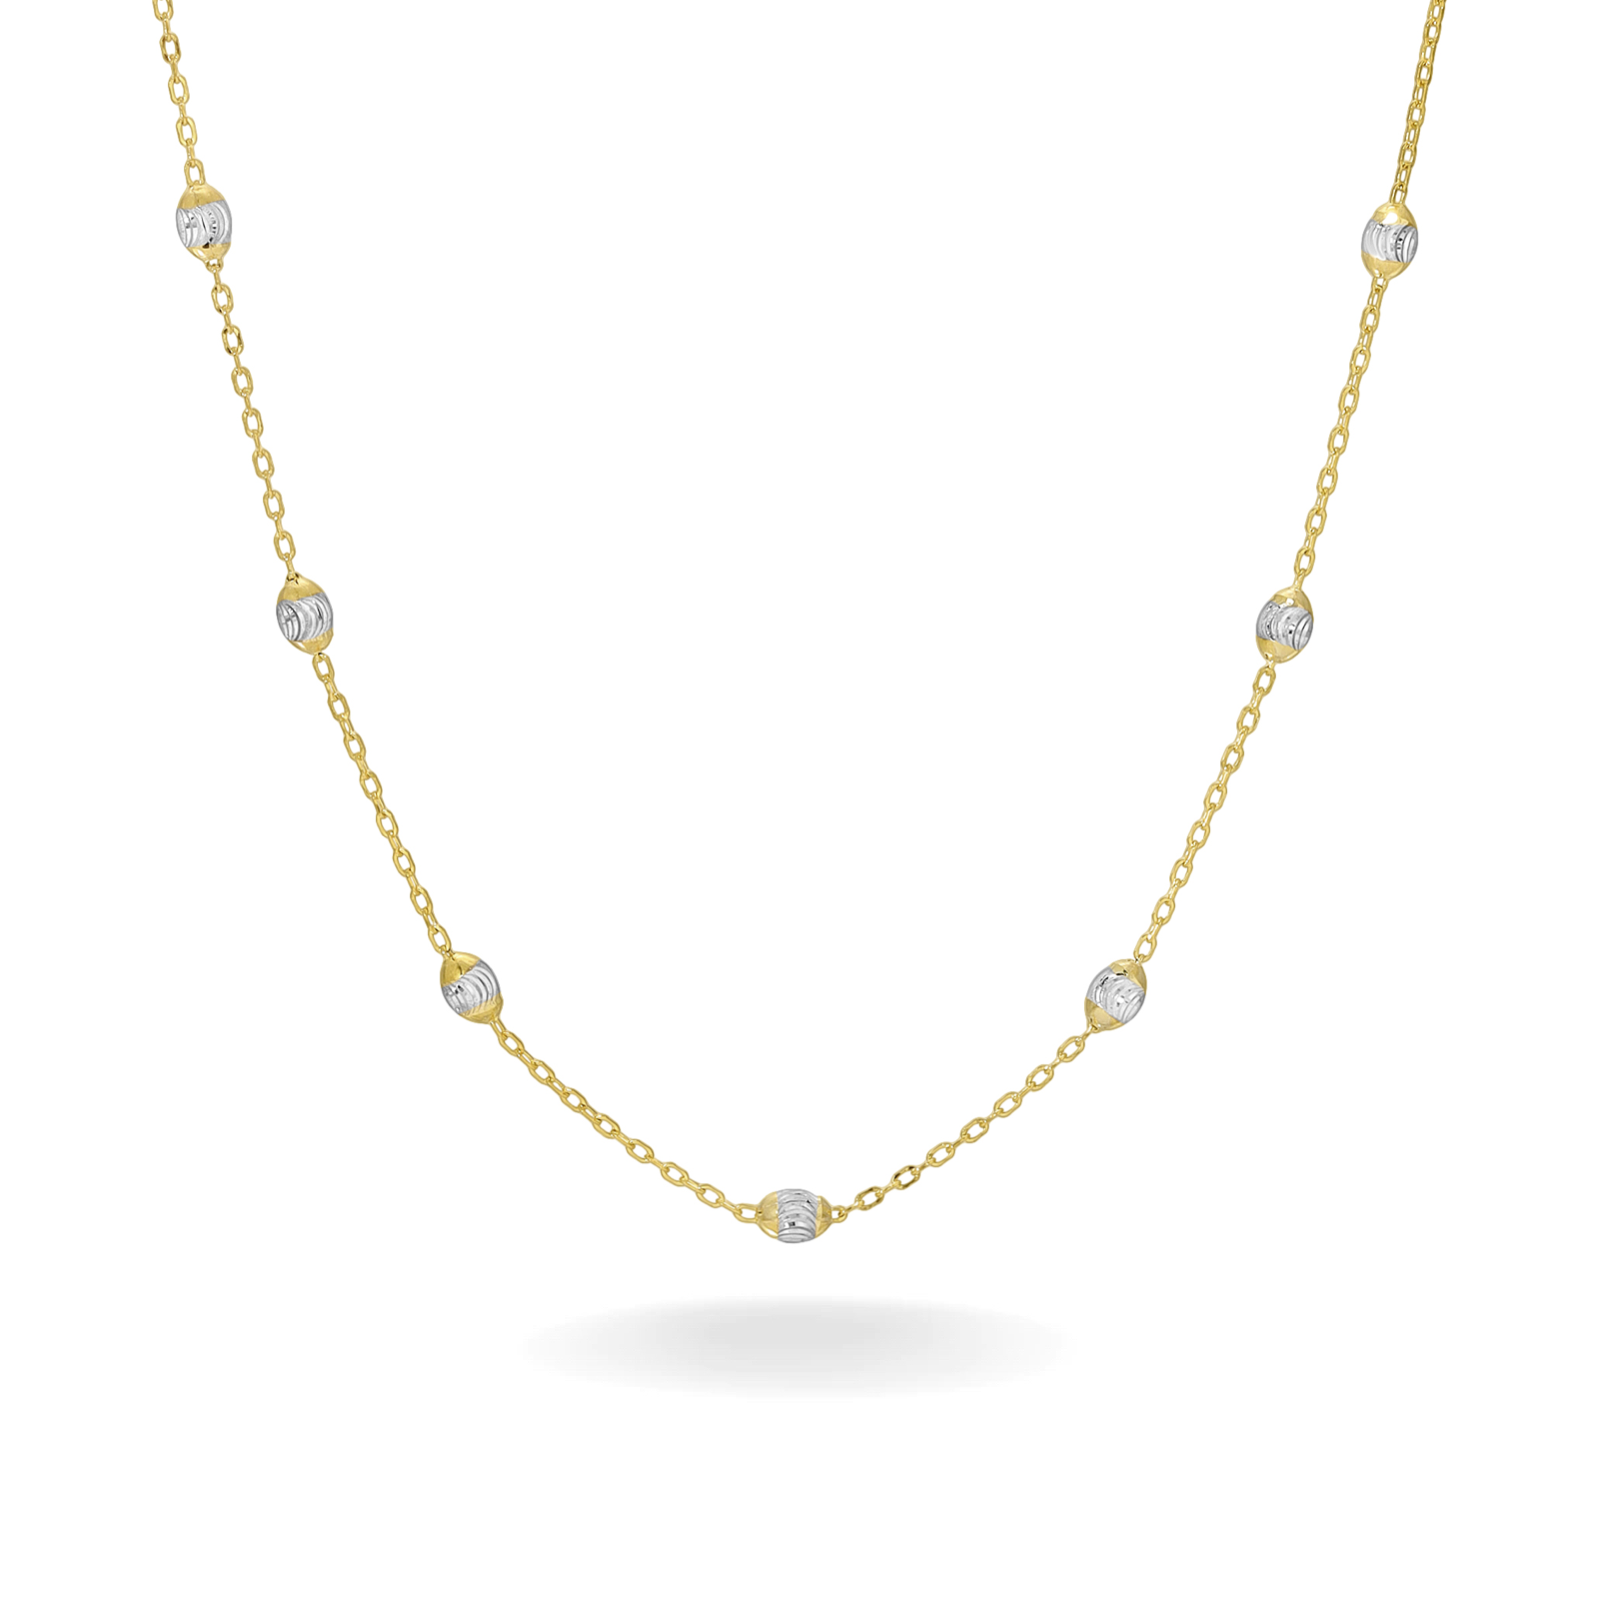 14K YELLOW/WHITE GOLD DISCO BEADED ROLO CHAIN -1.5MM